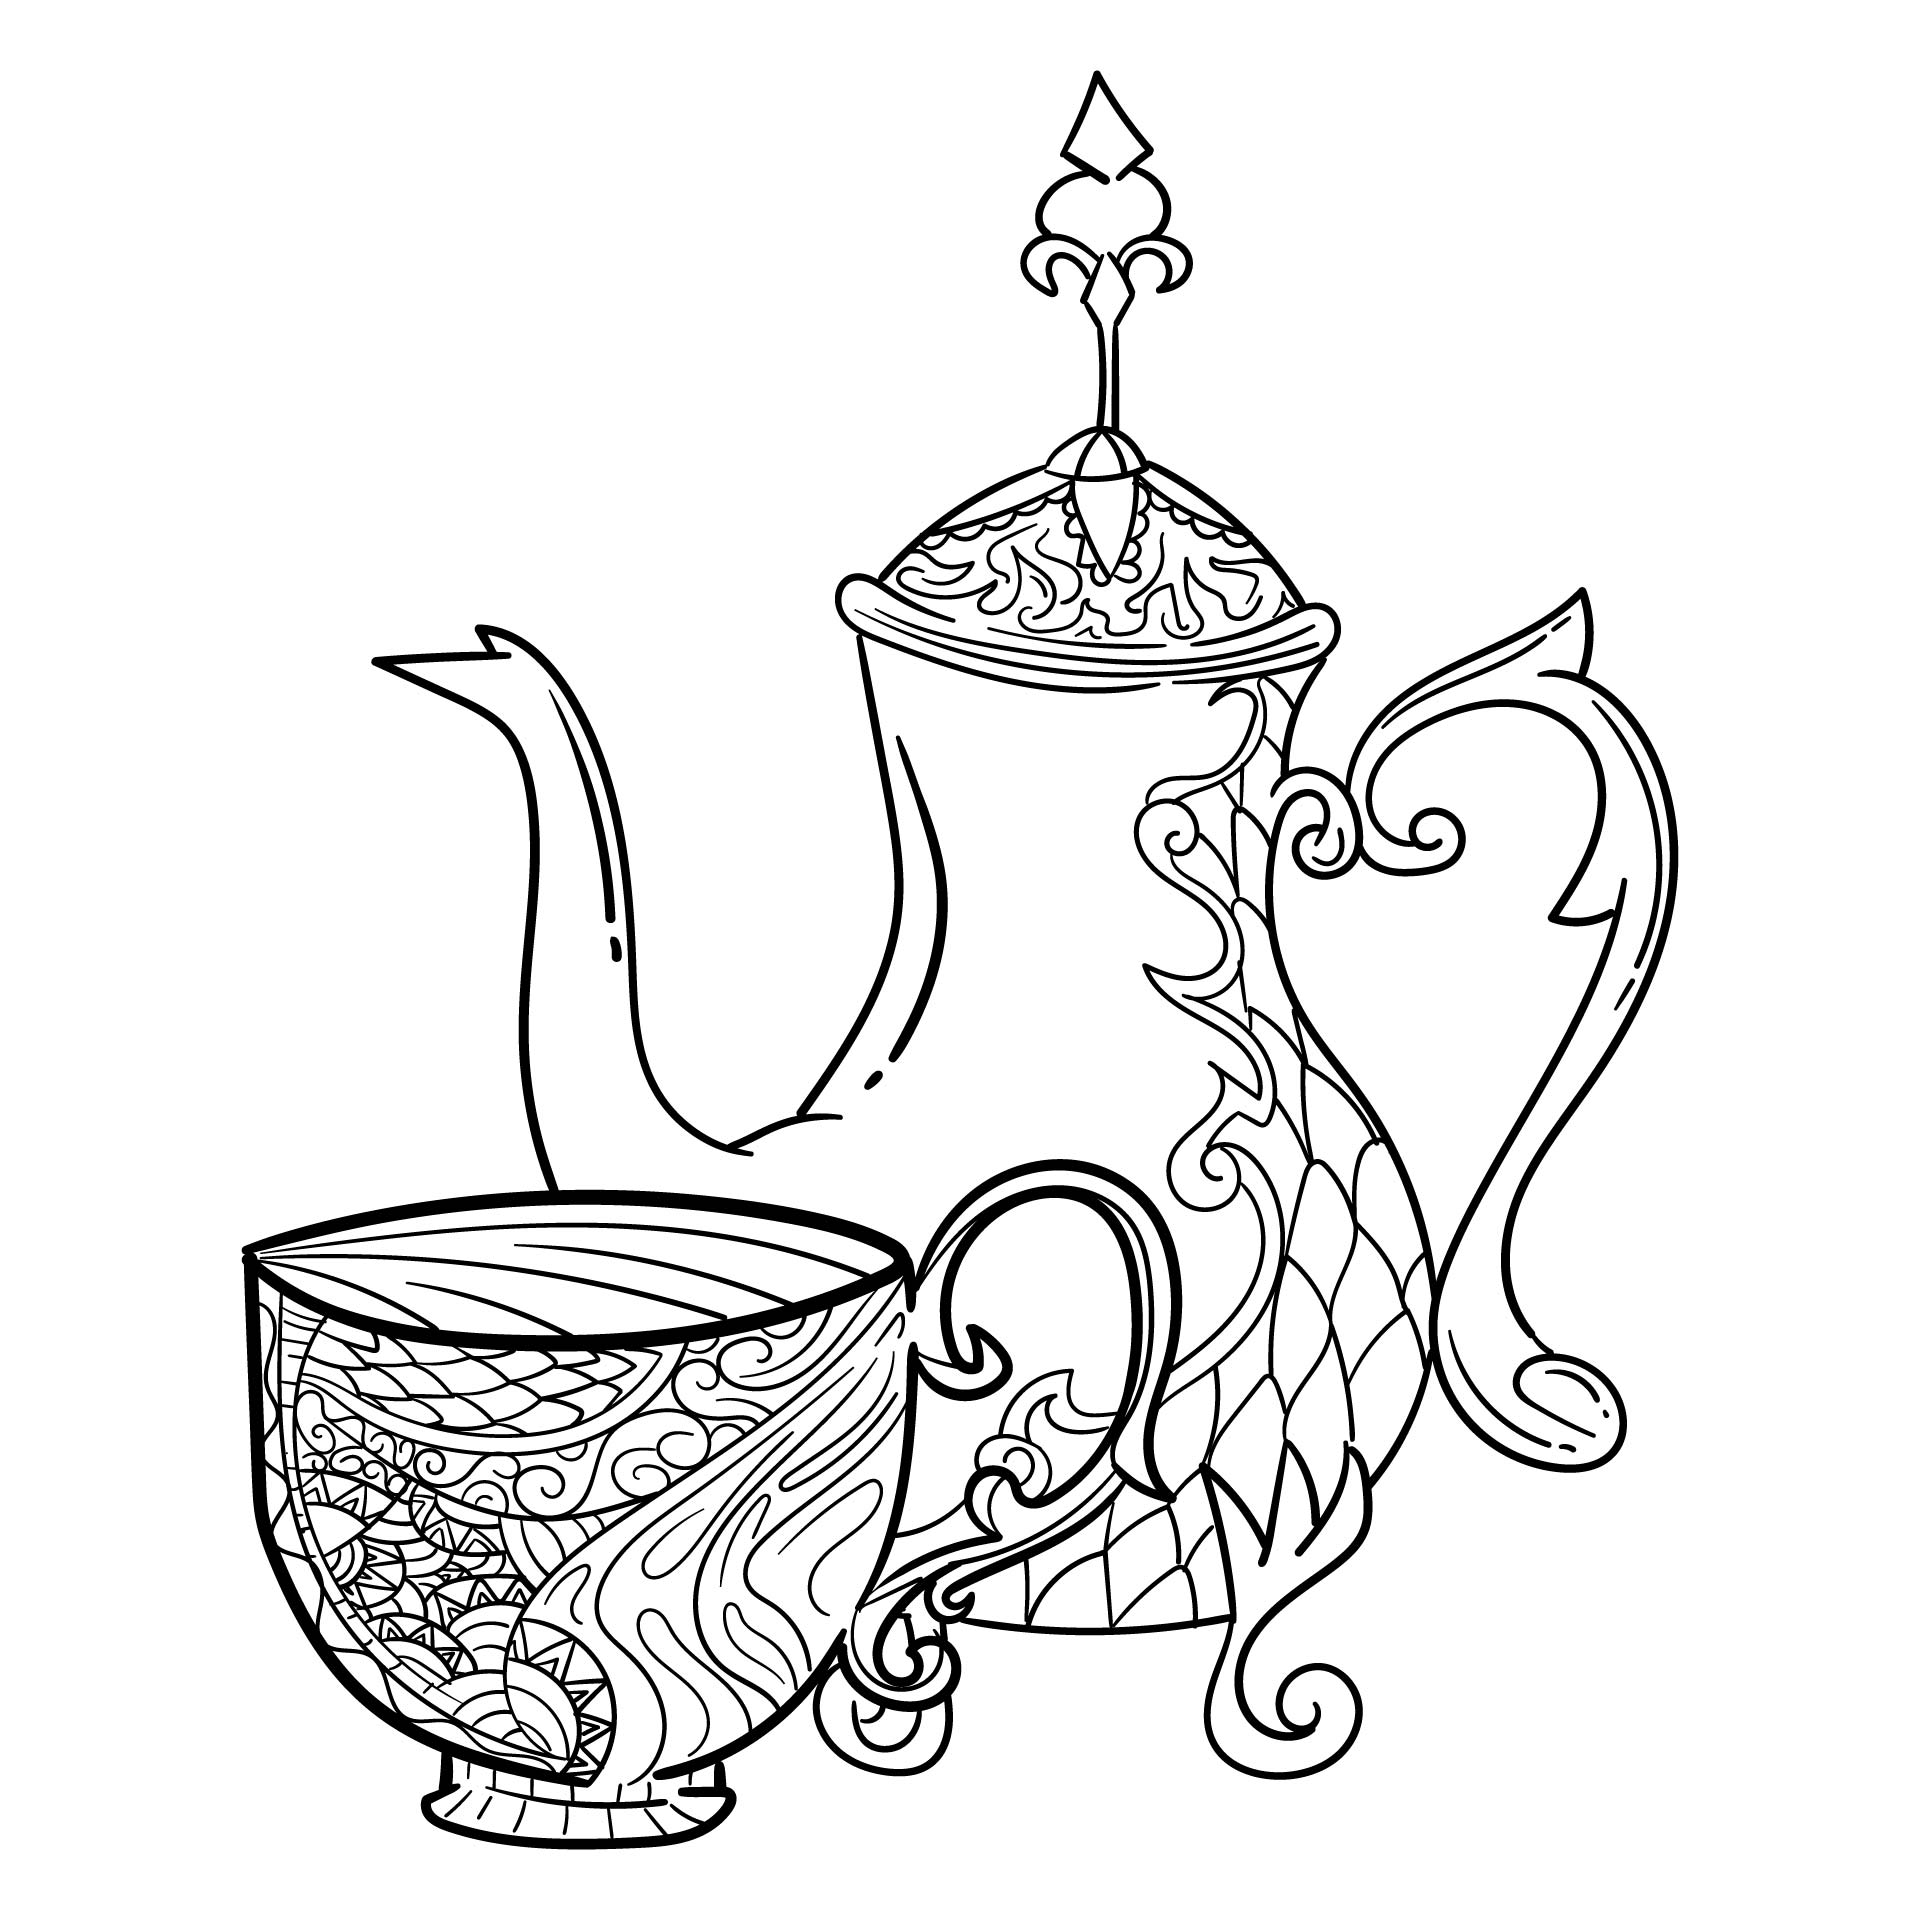 Printable Adult Coloring Pages Teacup